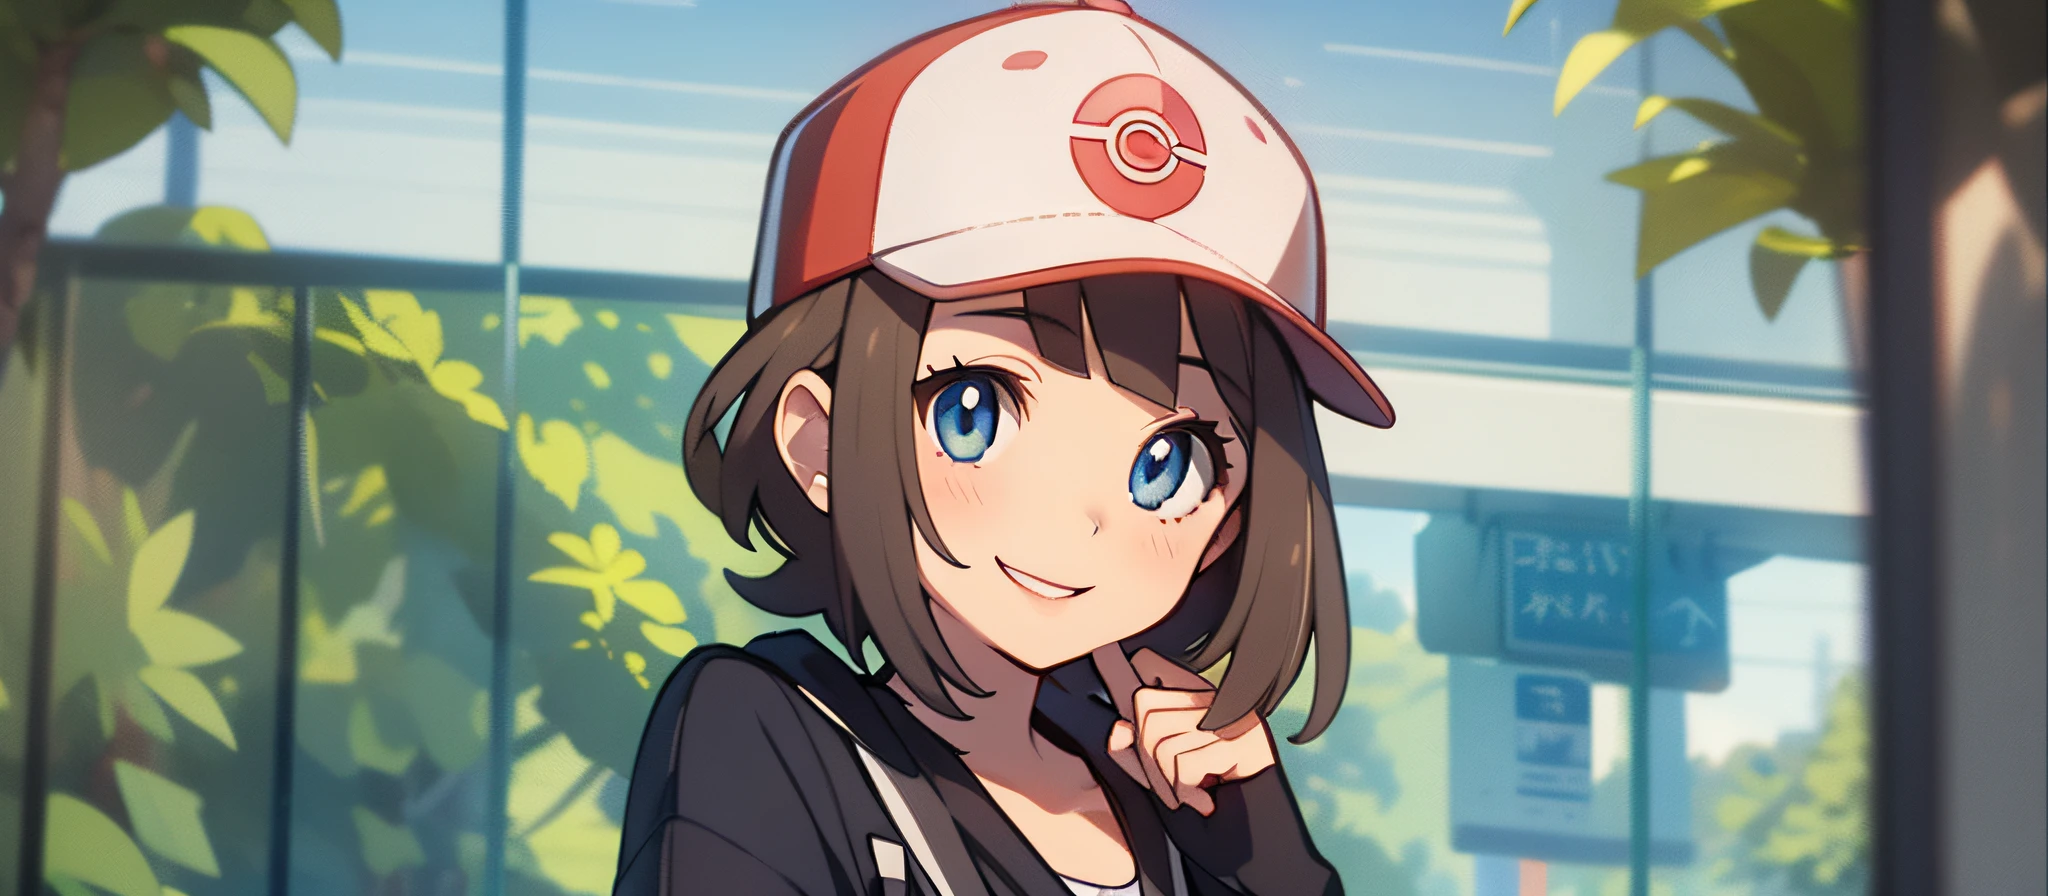 Create a background with a girl in a cap, holding a keychain(pokemon creature) and smiling